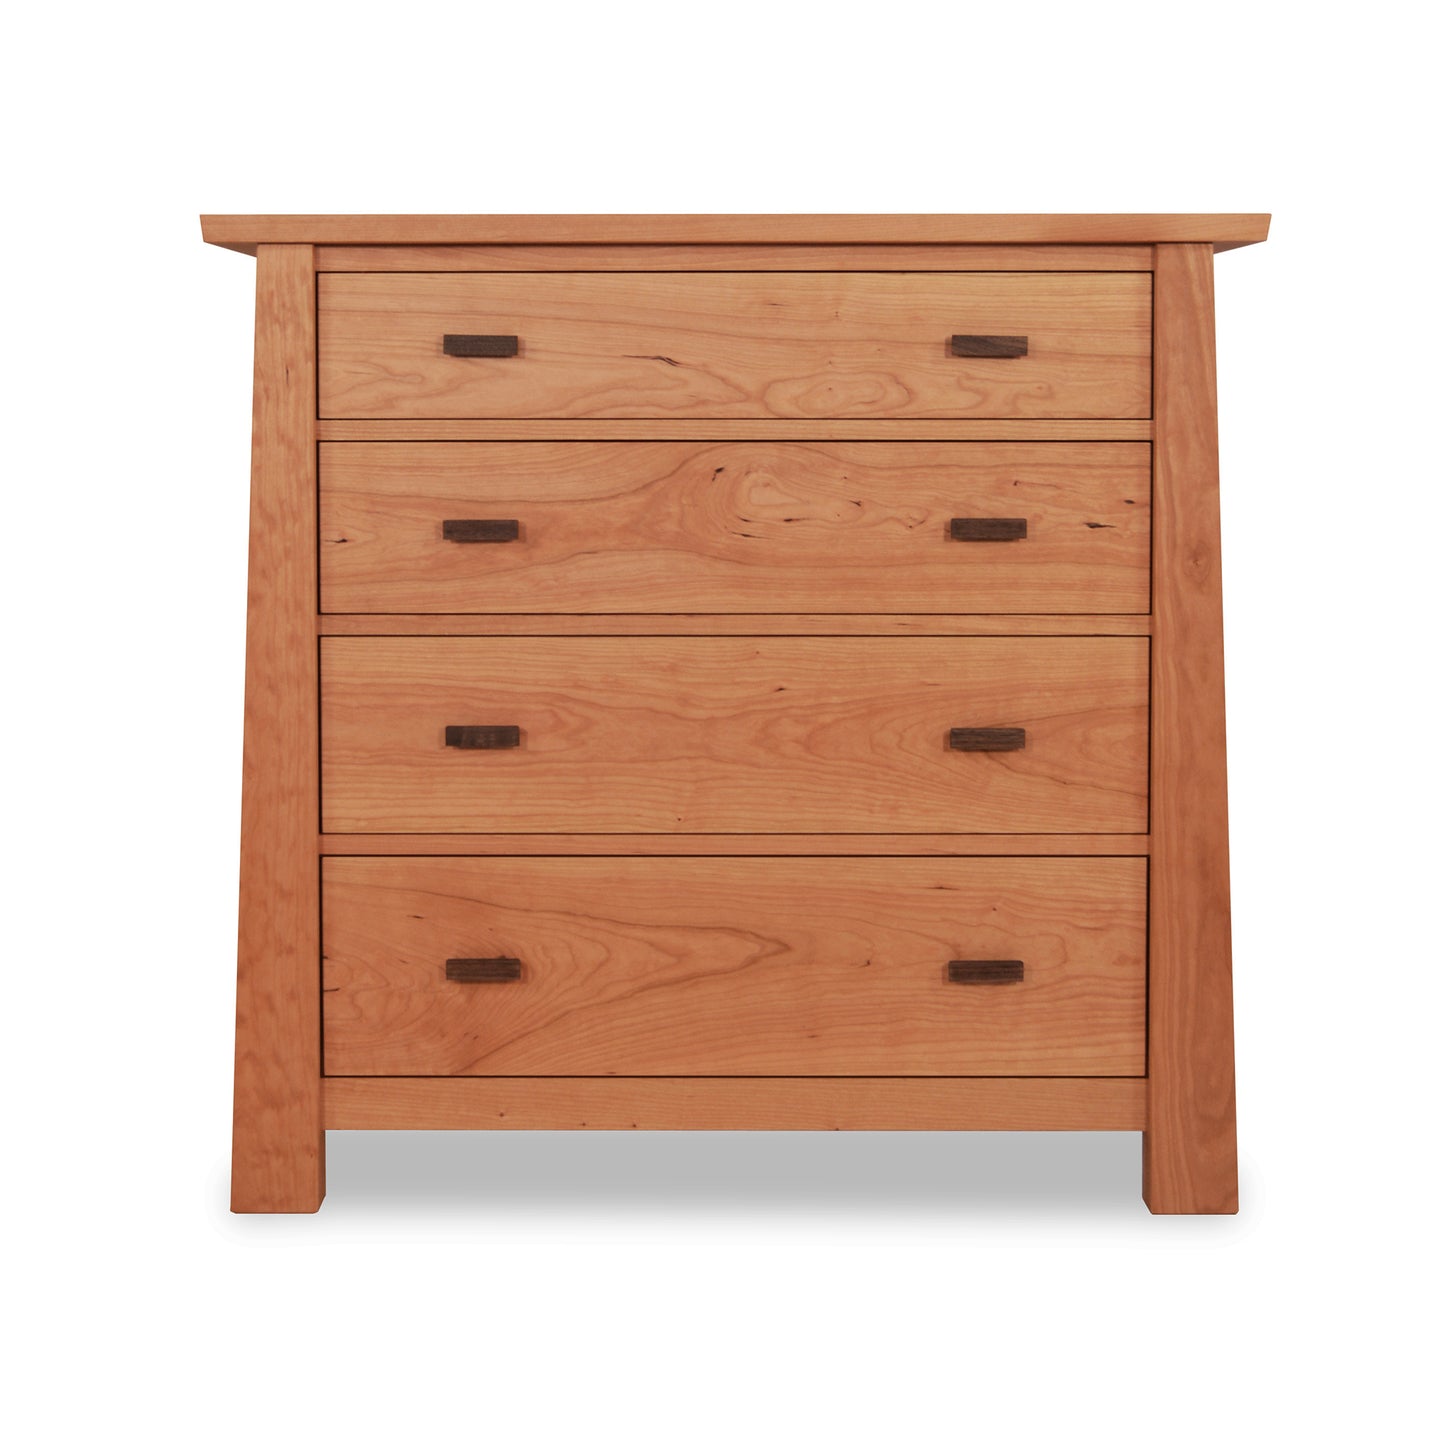 A Maple Corner Woodworks Gamble 4-Drawer Chest on a white background.